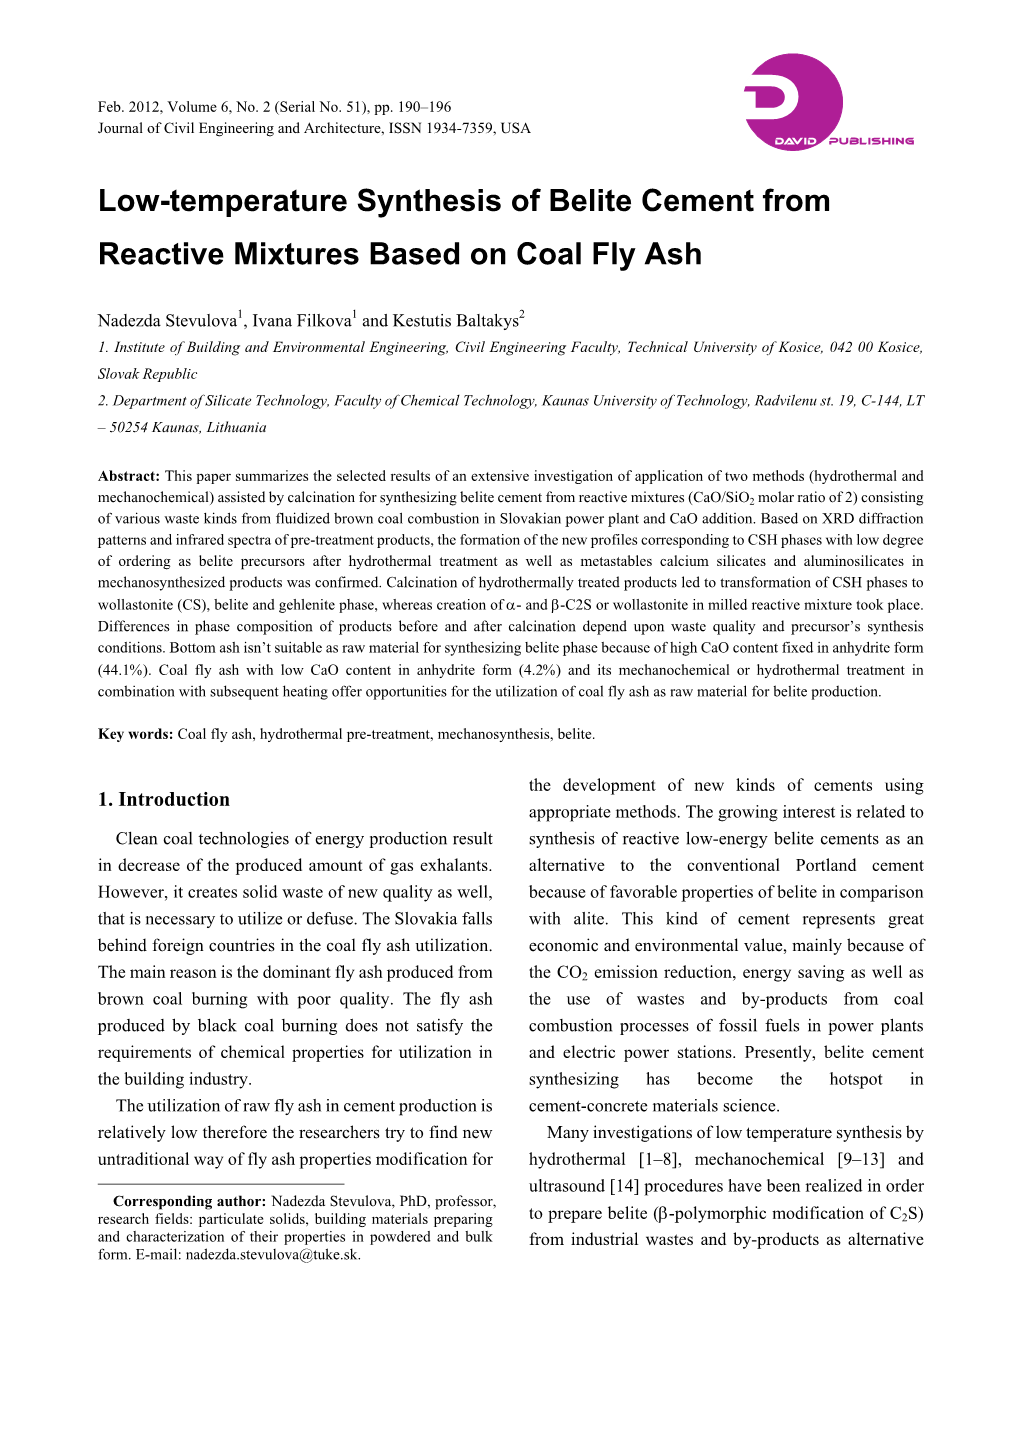 Low-Temperature Synthesis of Belite Cement from Reactive Mixtures Based on Coal Fly Ash